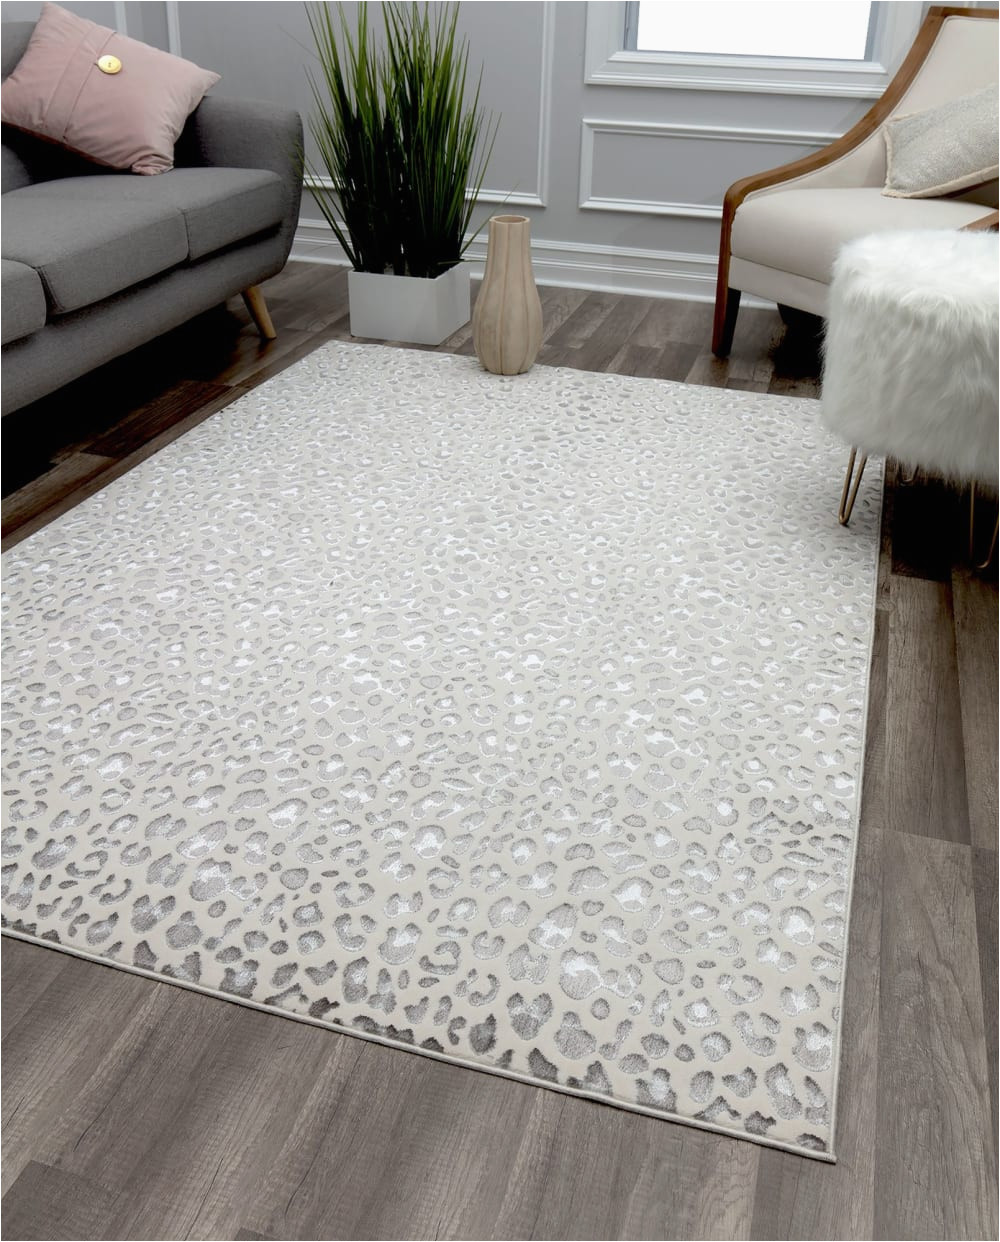 Pier 1 area Rugs 5×7 Natura Leopard Contemporary White and Silver Rug